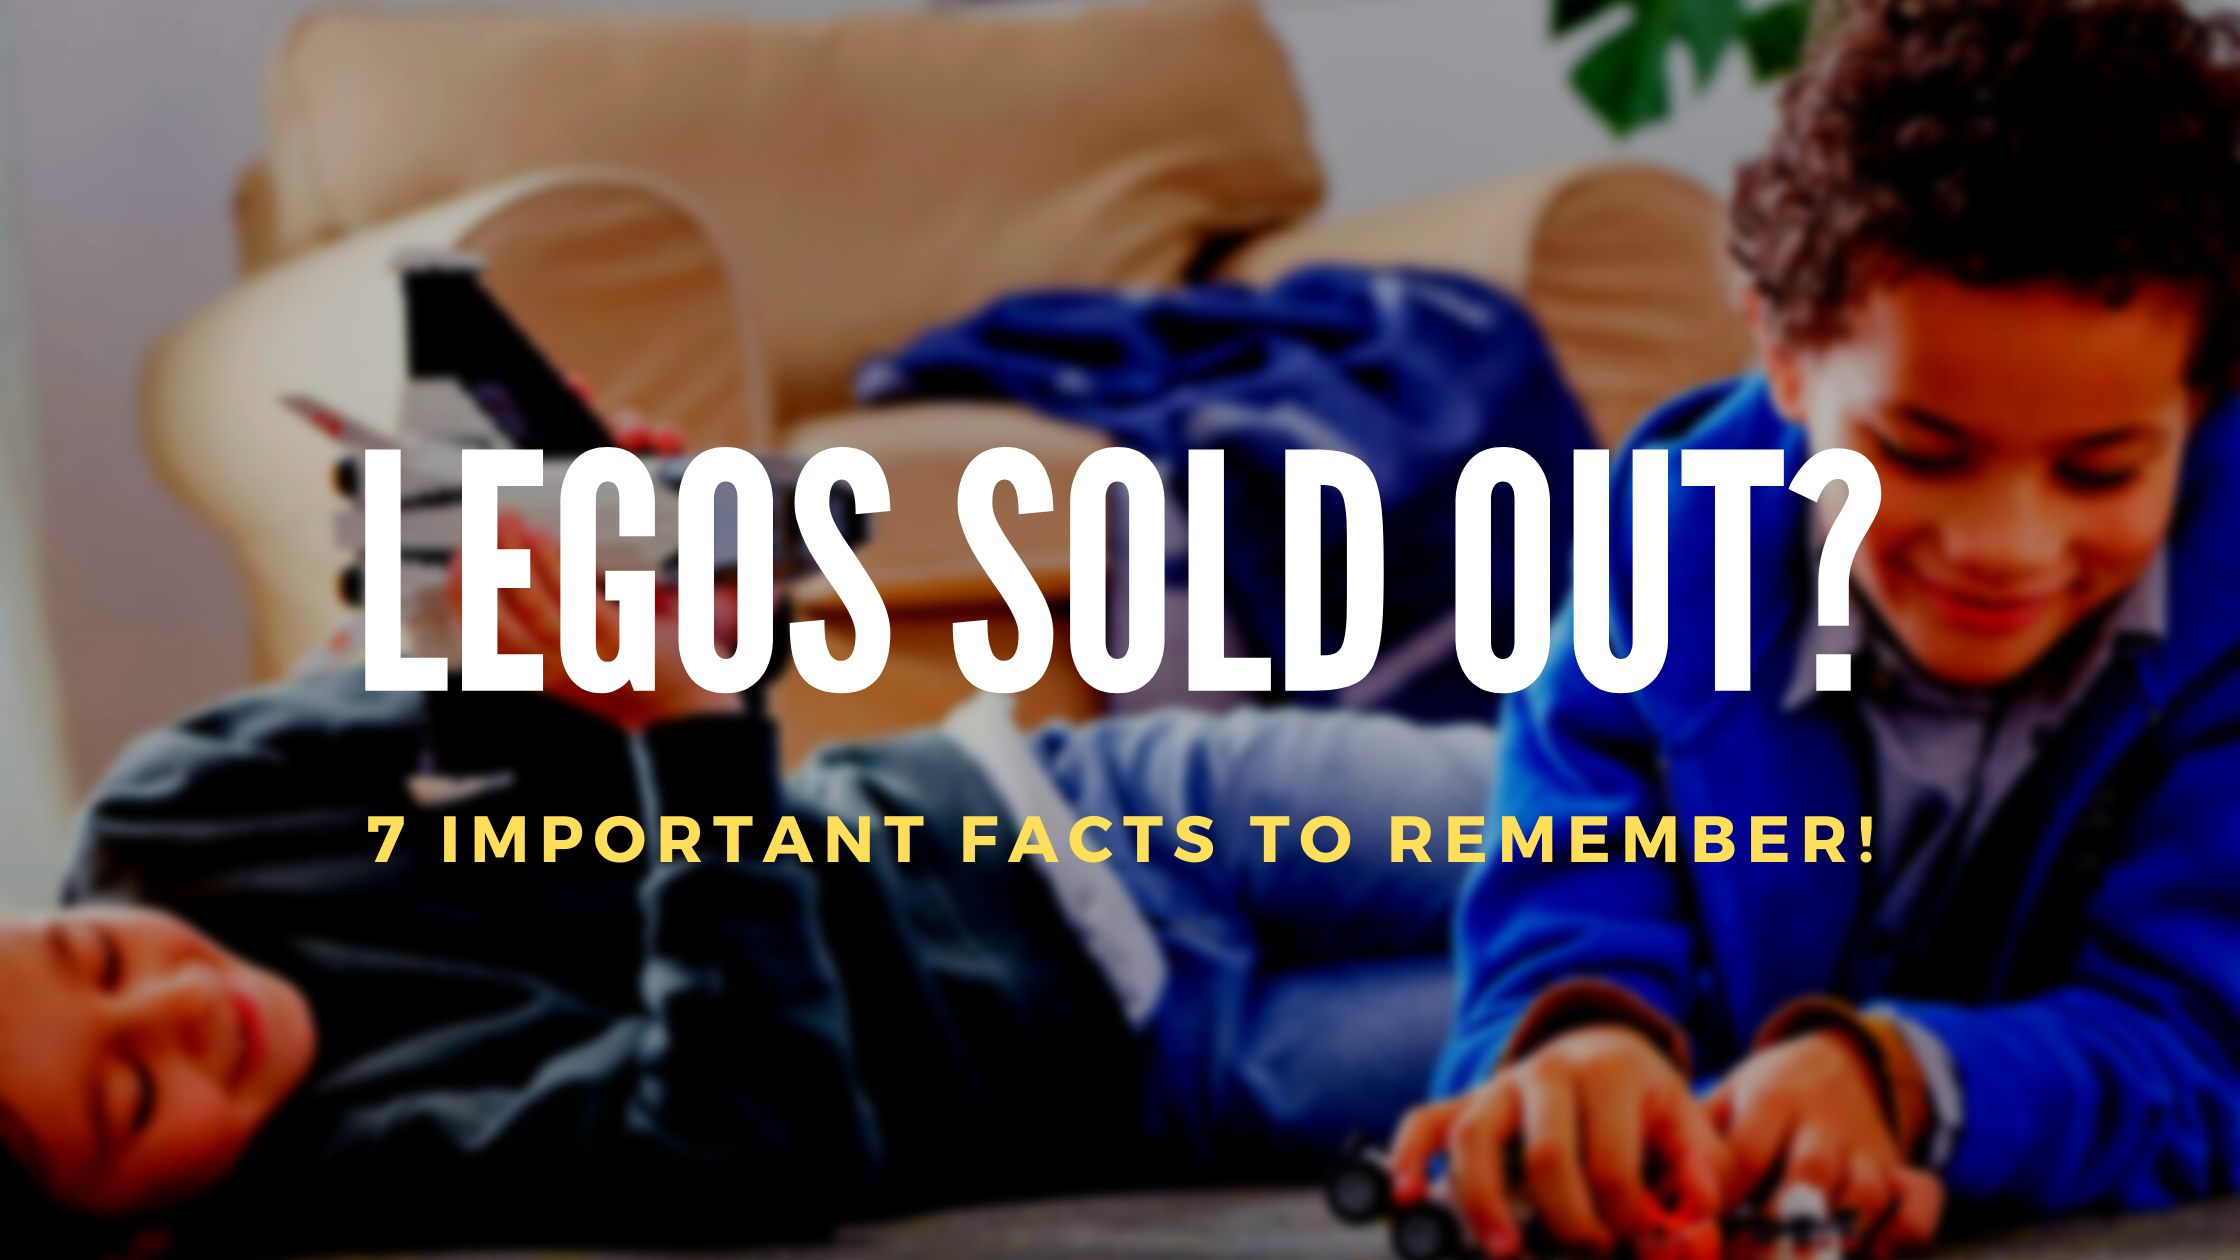 Legos sold out